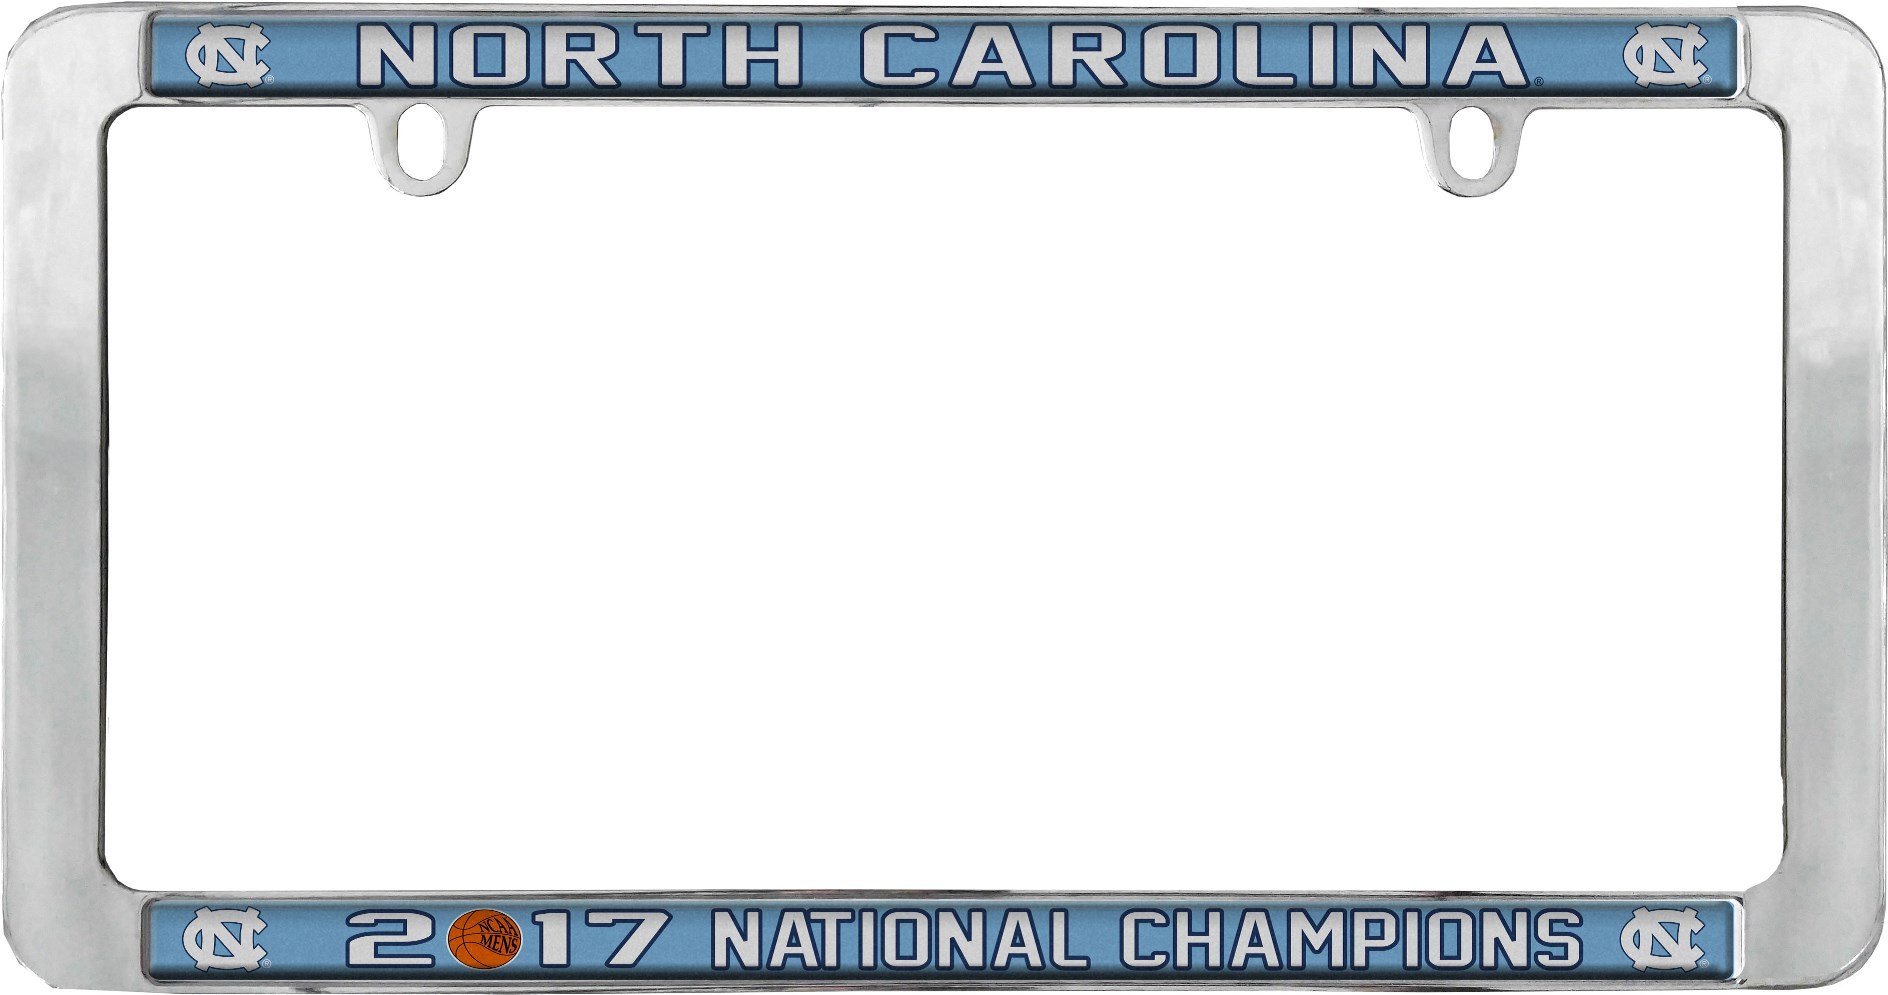 University of North Carolina Tar Heels 2017 Champions License Plate Frame Tag Cover, Laser Mirrored Inserts, 12x6 Inch